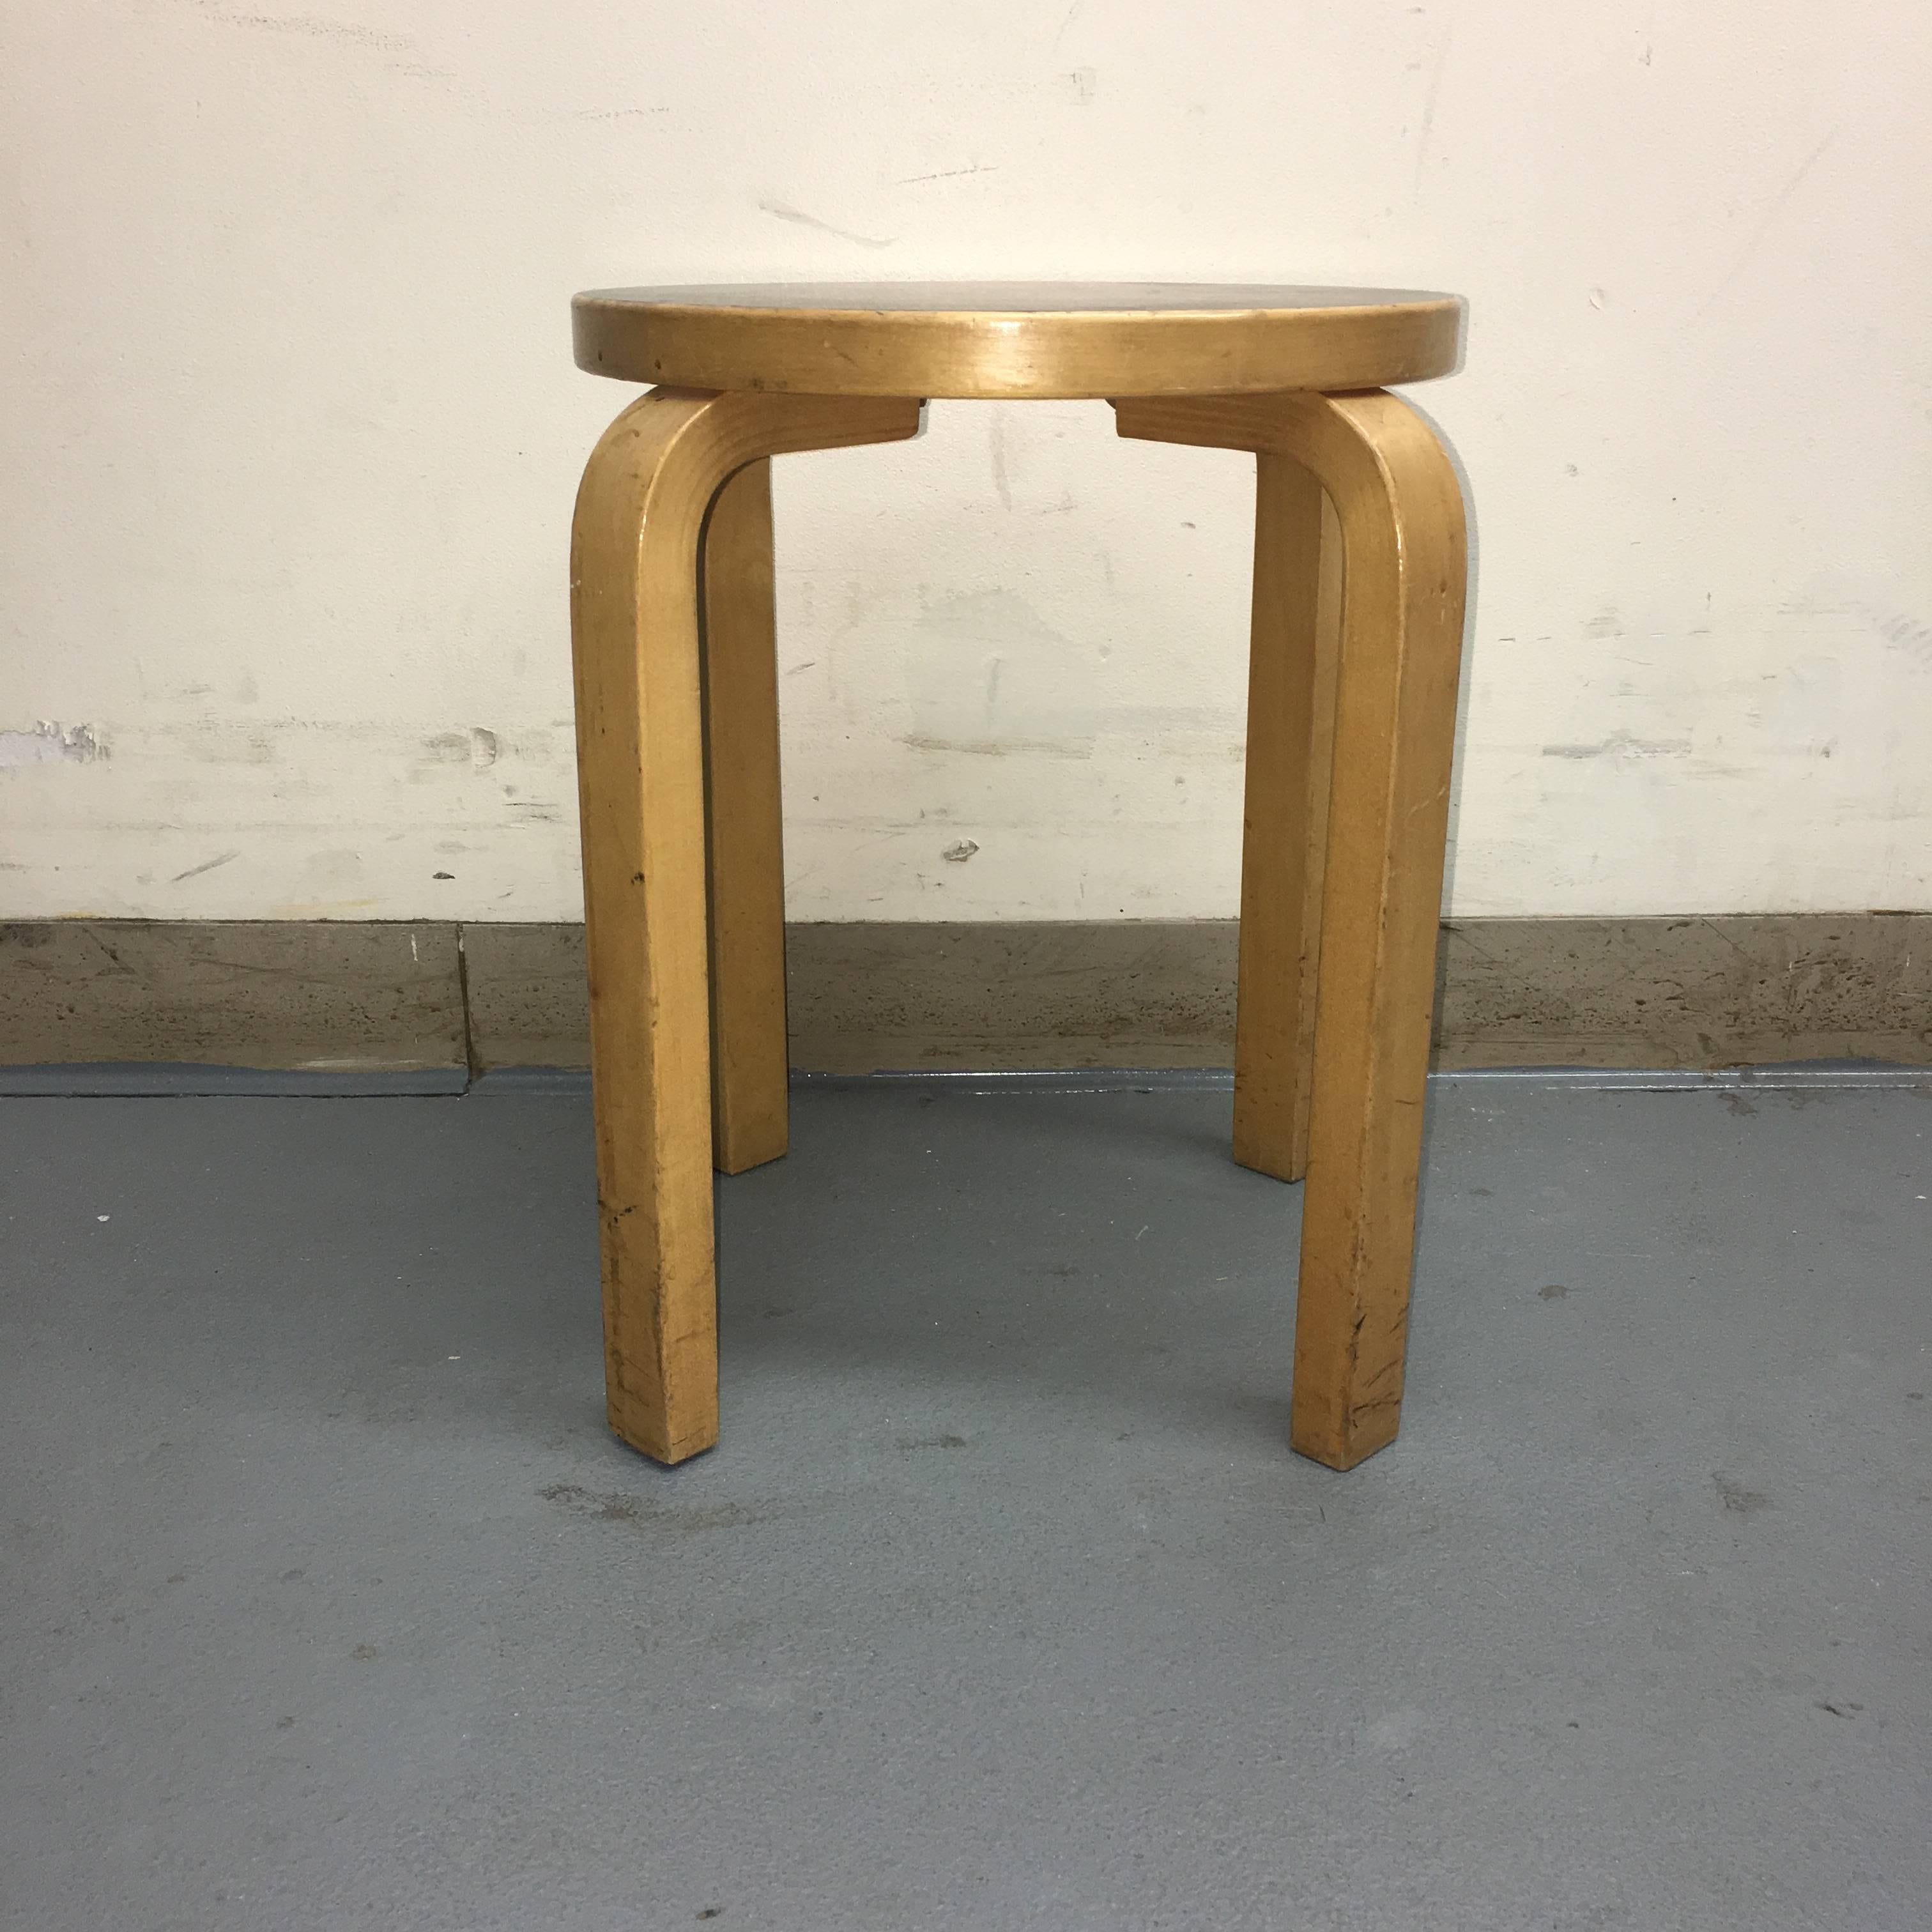 Vintage Alvar Aalto stool. Beech with black formica top. In good condition with normal wear. Structurally sound. Signed ICF New York.